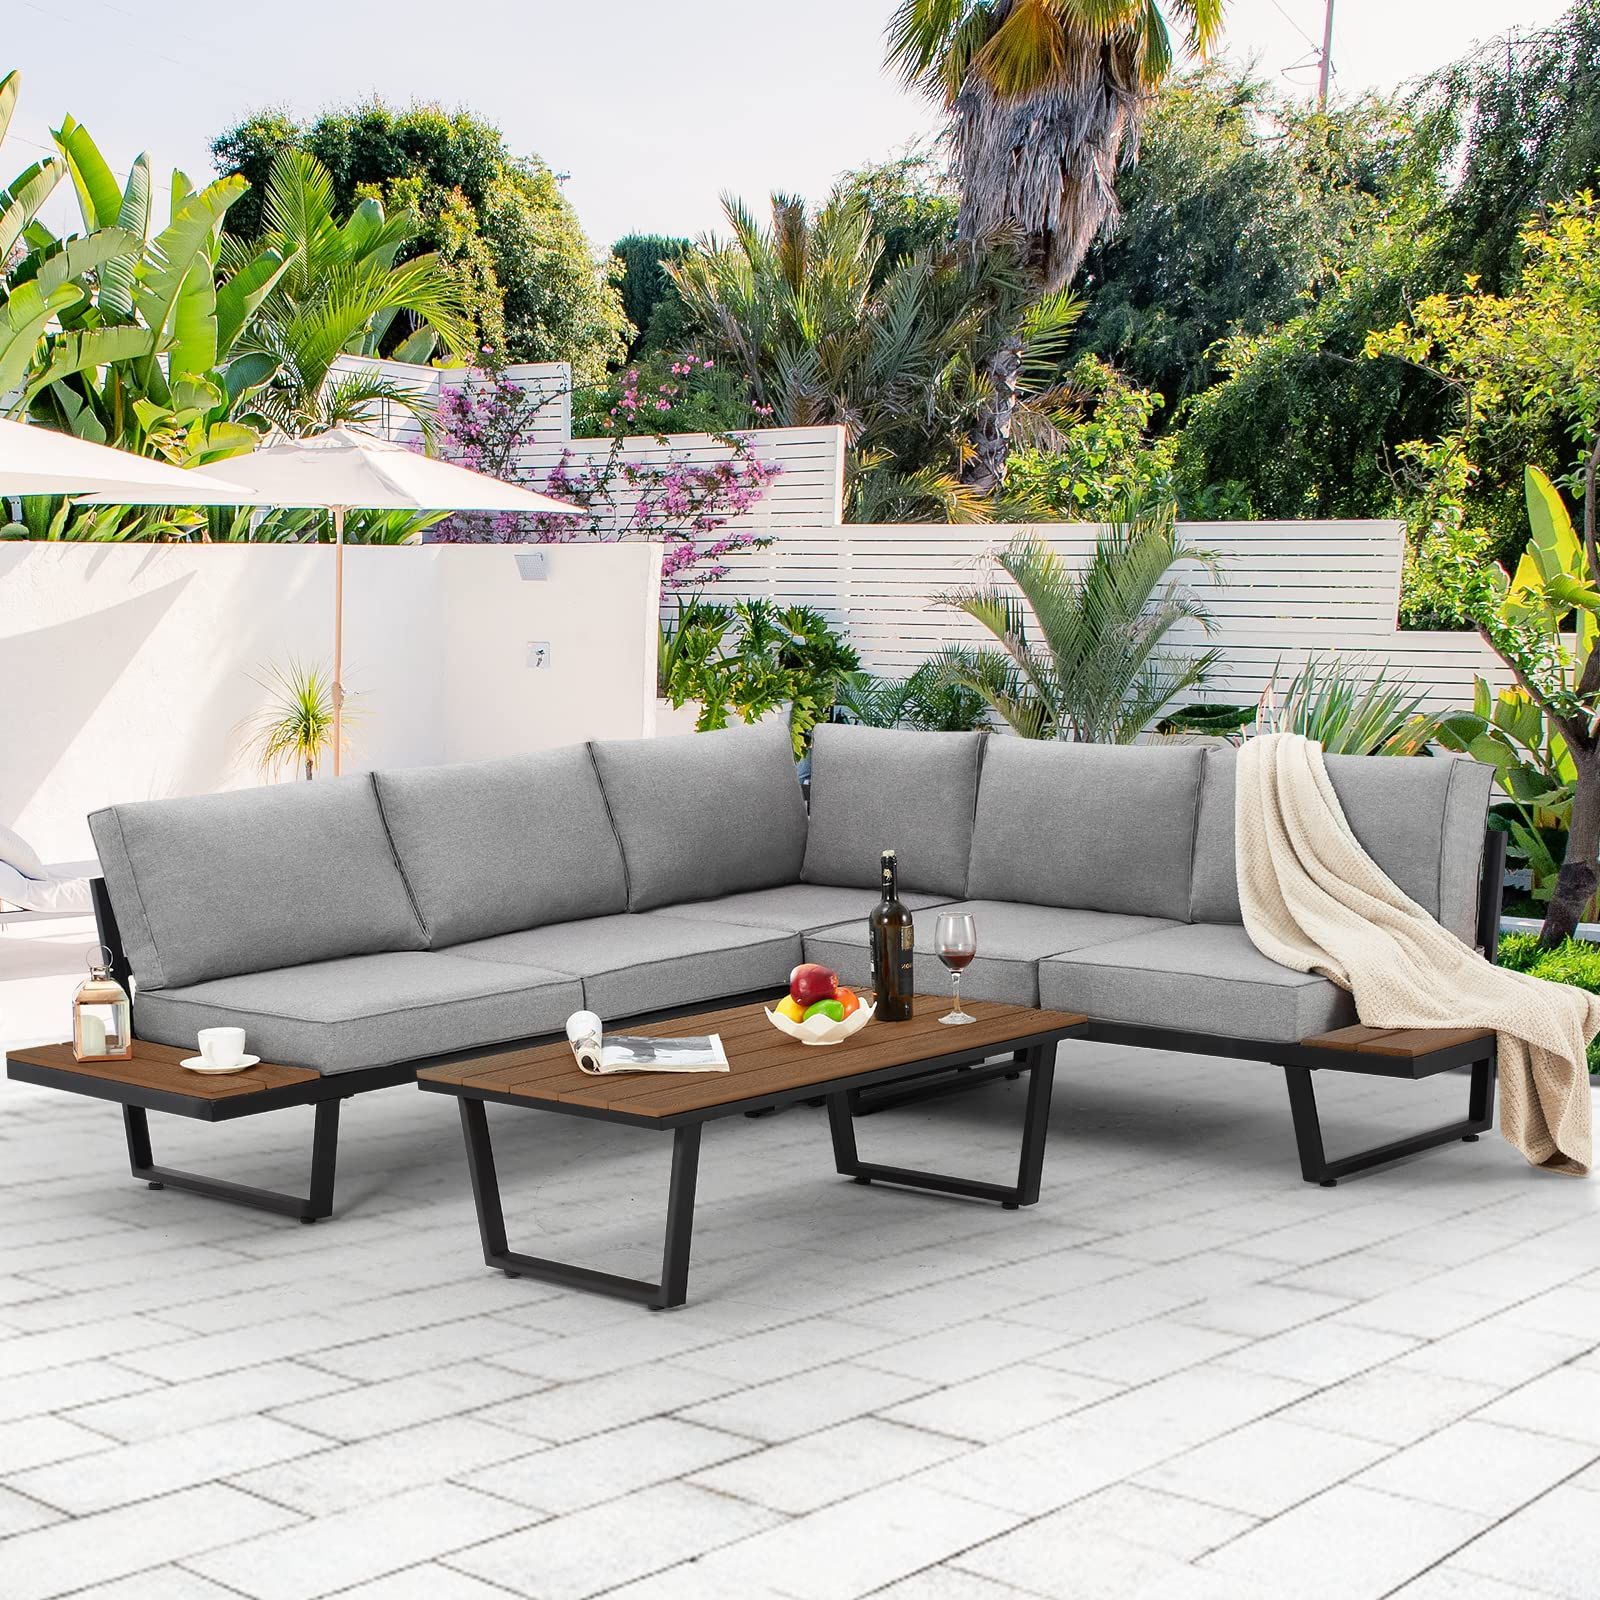 Most Current Side Table Iron Frame Patio Furniture Set Within Amazon: Erommy 4 Pieces Outdoor Sectional Sofa Set With Coffee Table,  91''×91'' Extra Large L Shaped Metal Conversation Set With All Weather Gray  Cushion And Built In Side Table For Patio, Backyard, Garden : Patio, (View 7 of 15)